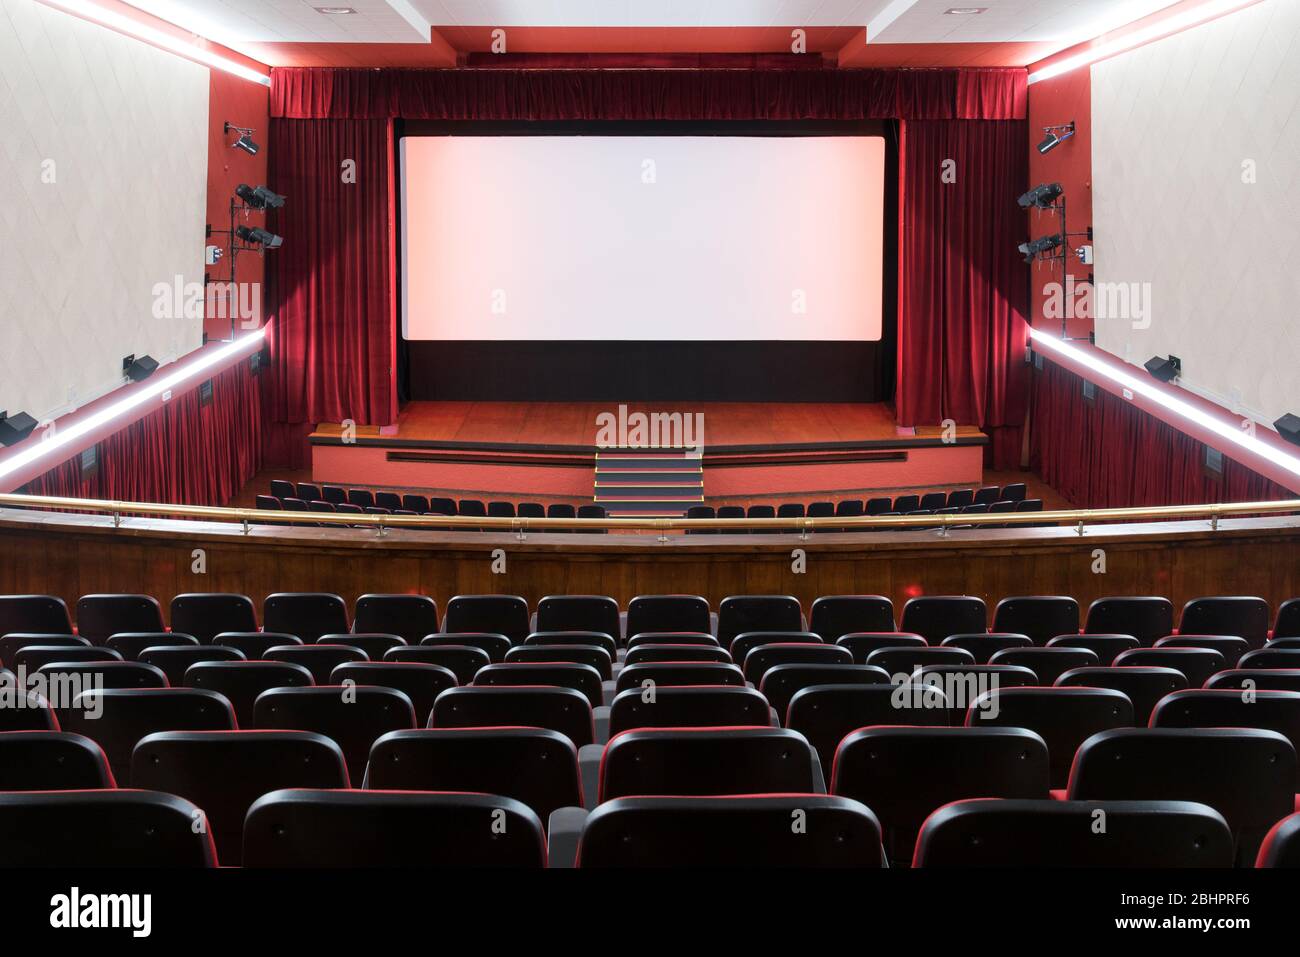 inside of movie theatre with vacant seats and the red curtains drawn open to reveal an empty stage viewed from the rear 2BHPRF6